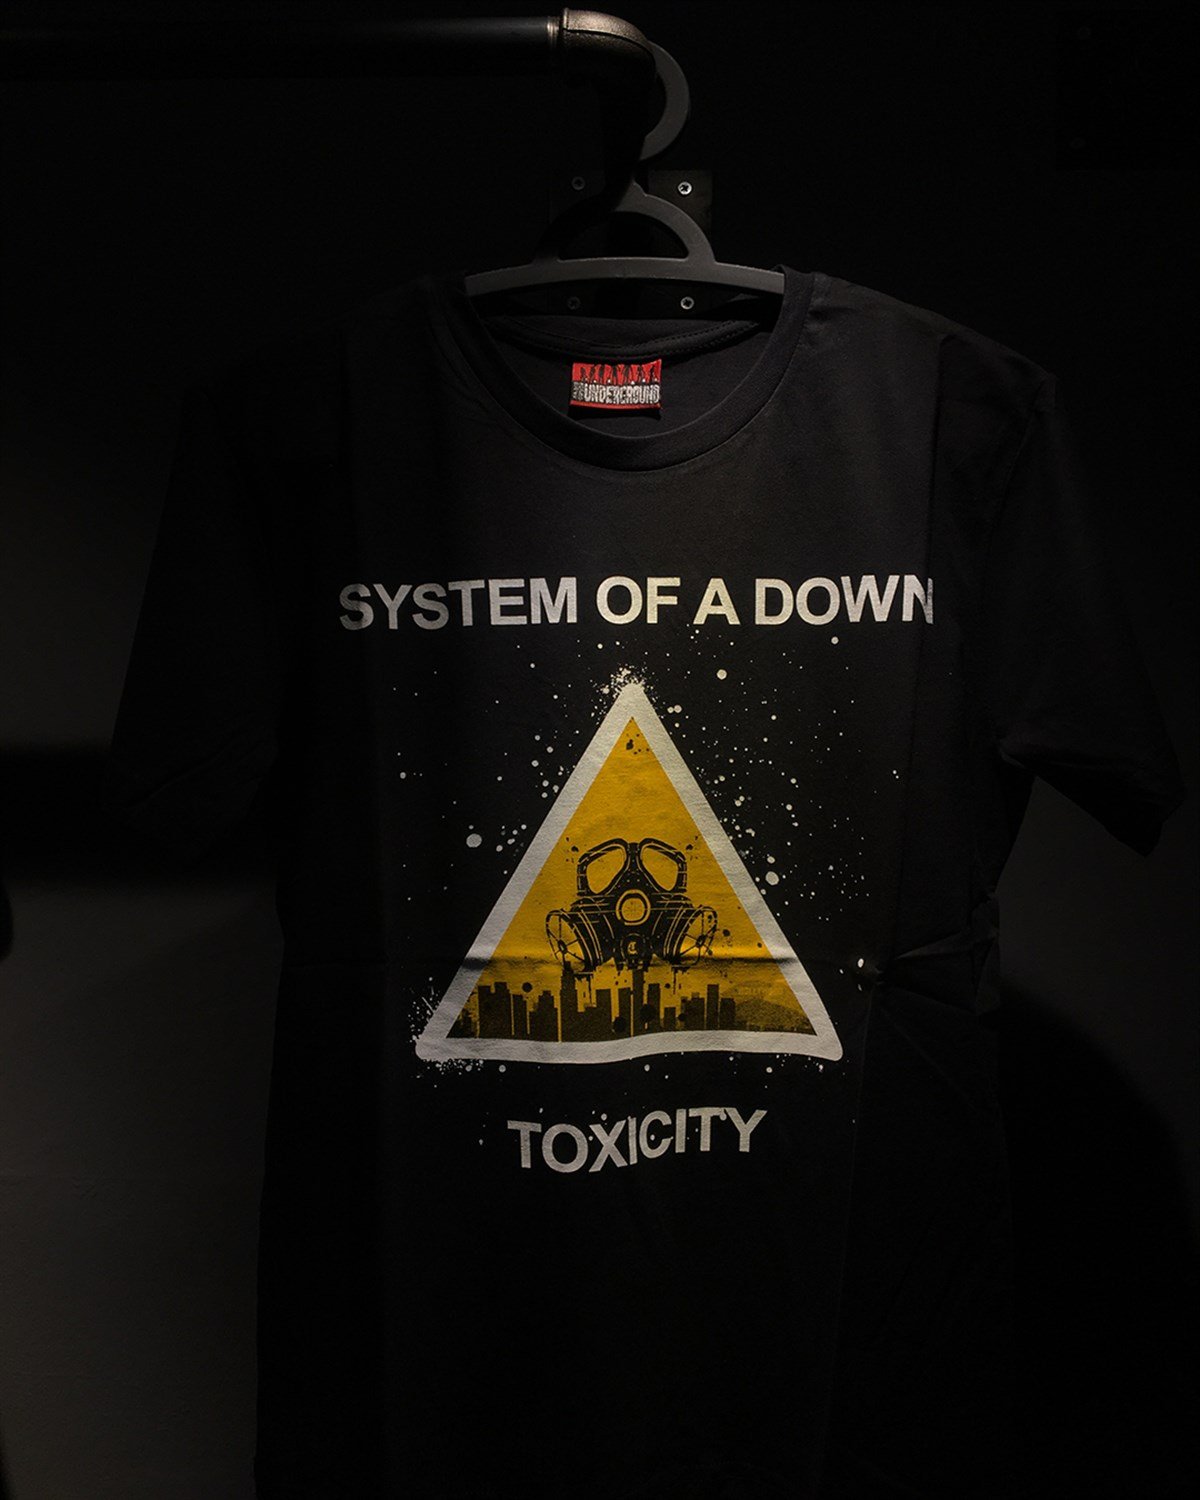 SYSTEM OF A DOWN Toxicity T-Shirt